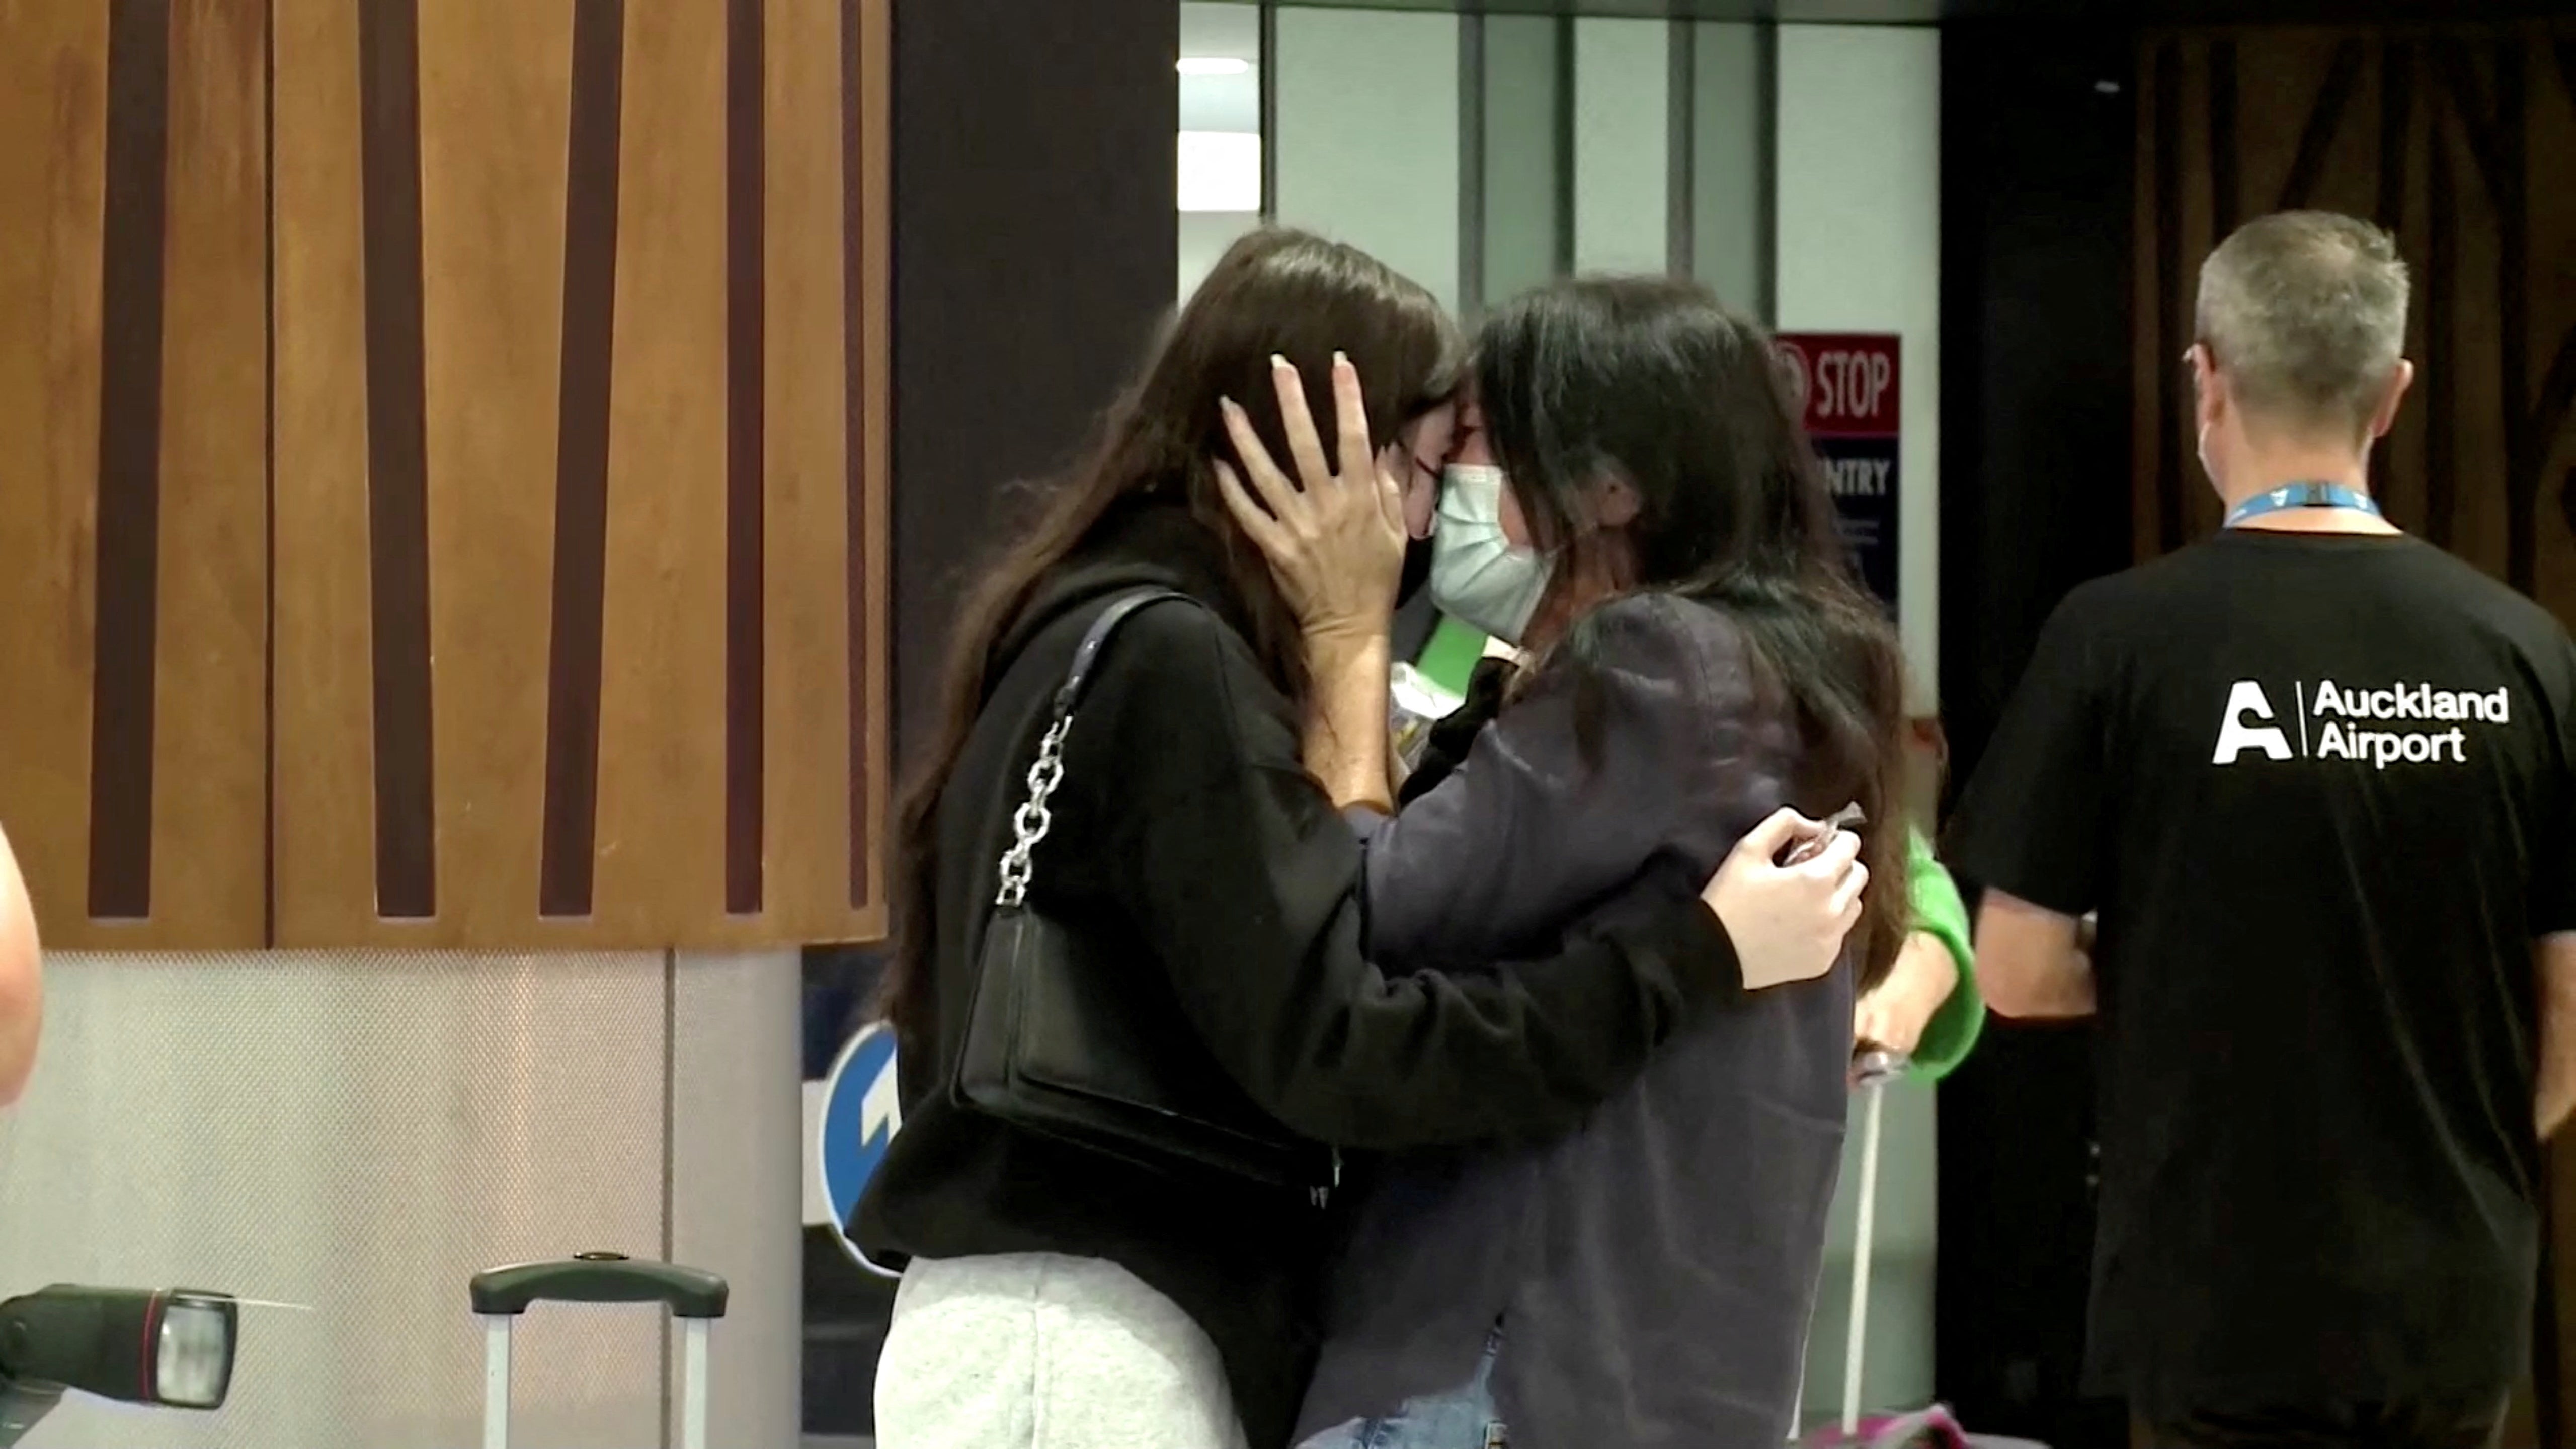 Emotional loved ones greet each other at Auckland Airport